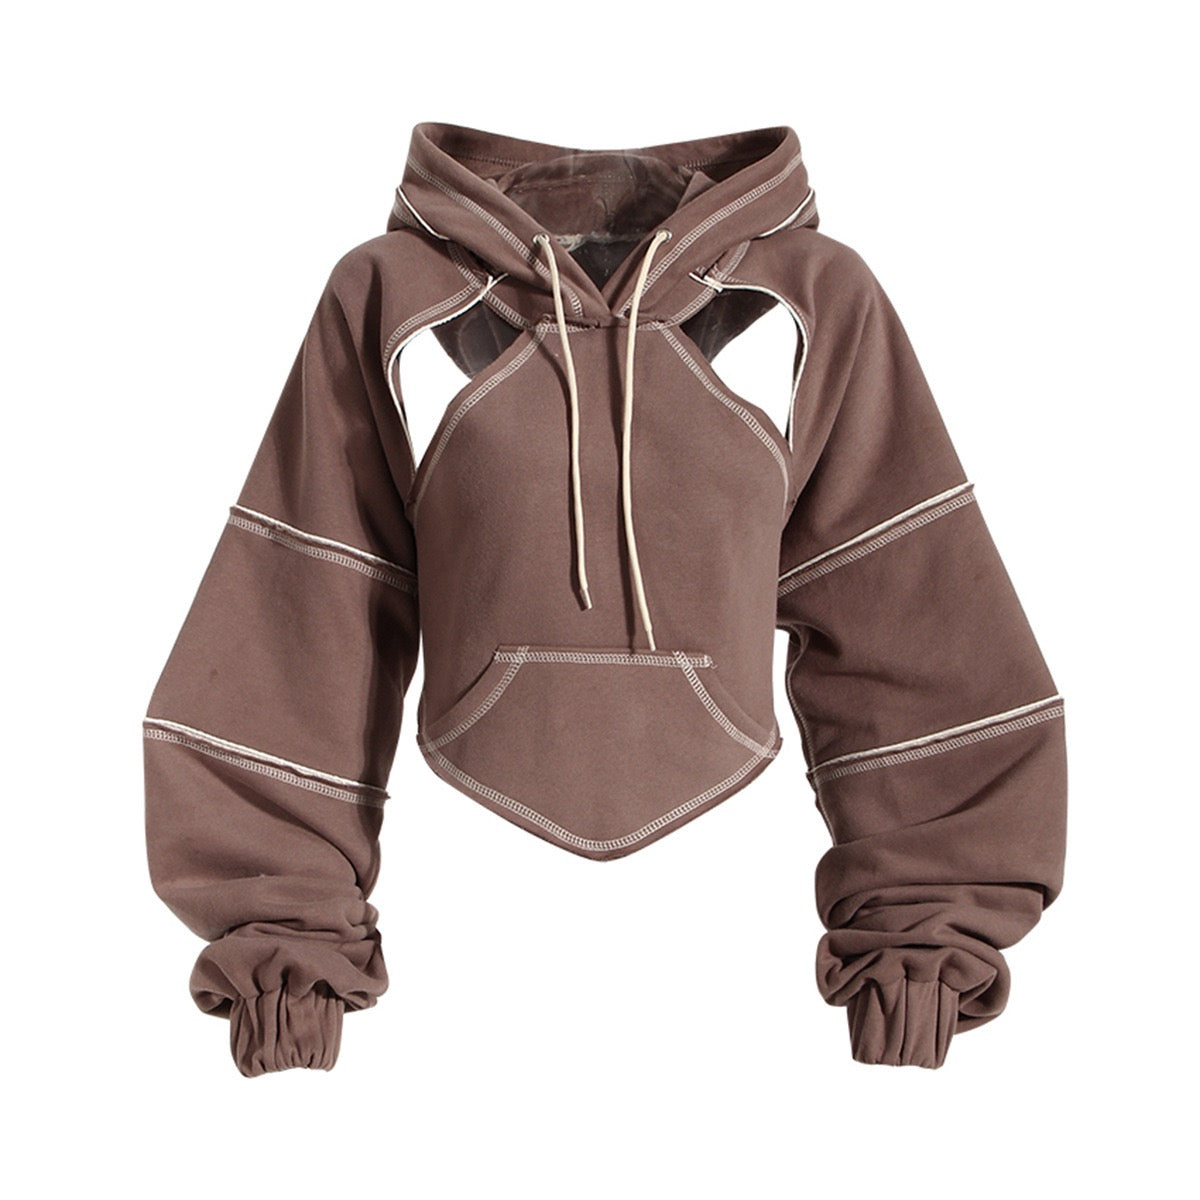 Edgy Chic Cut-Out Hoodie